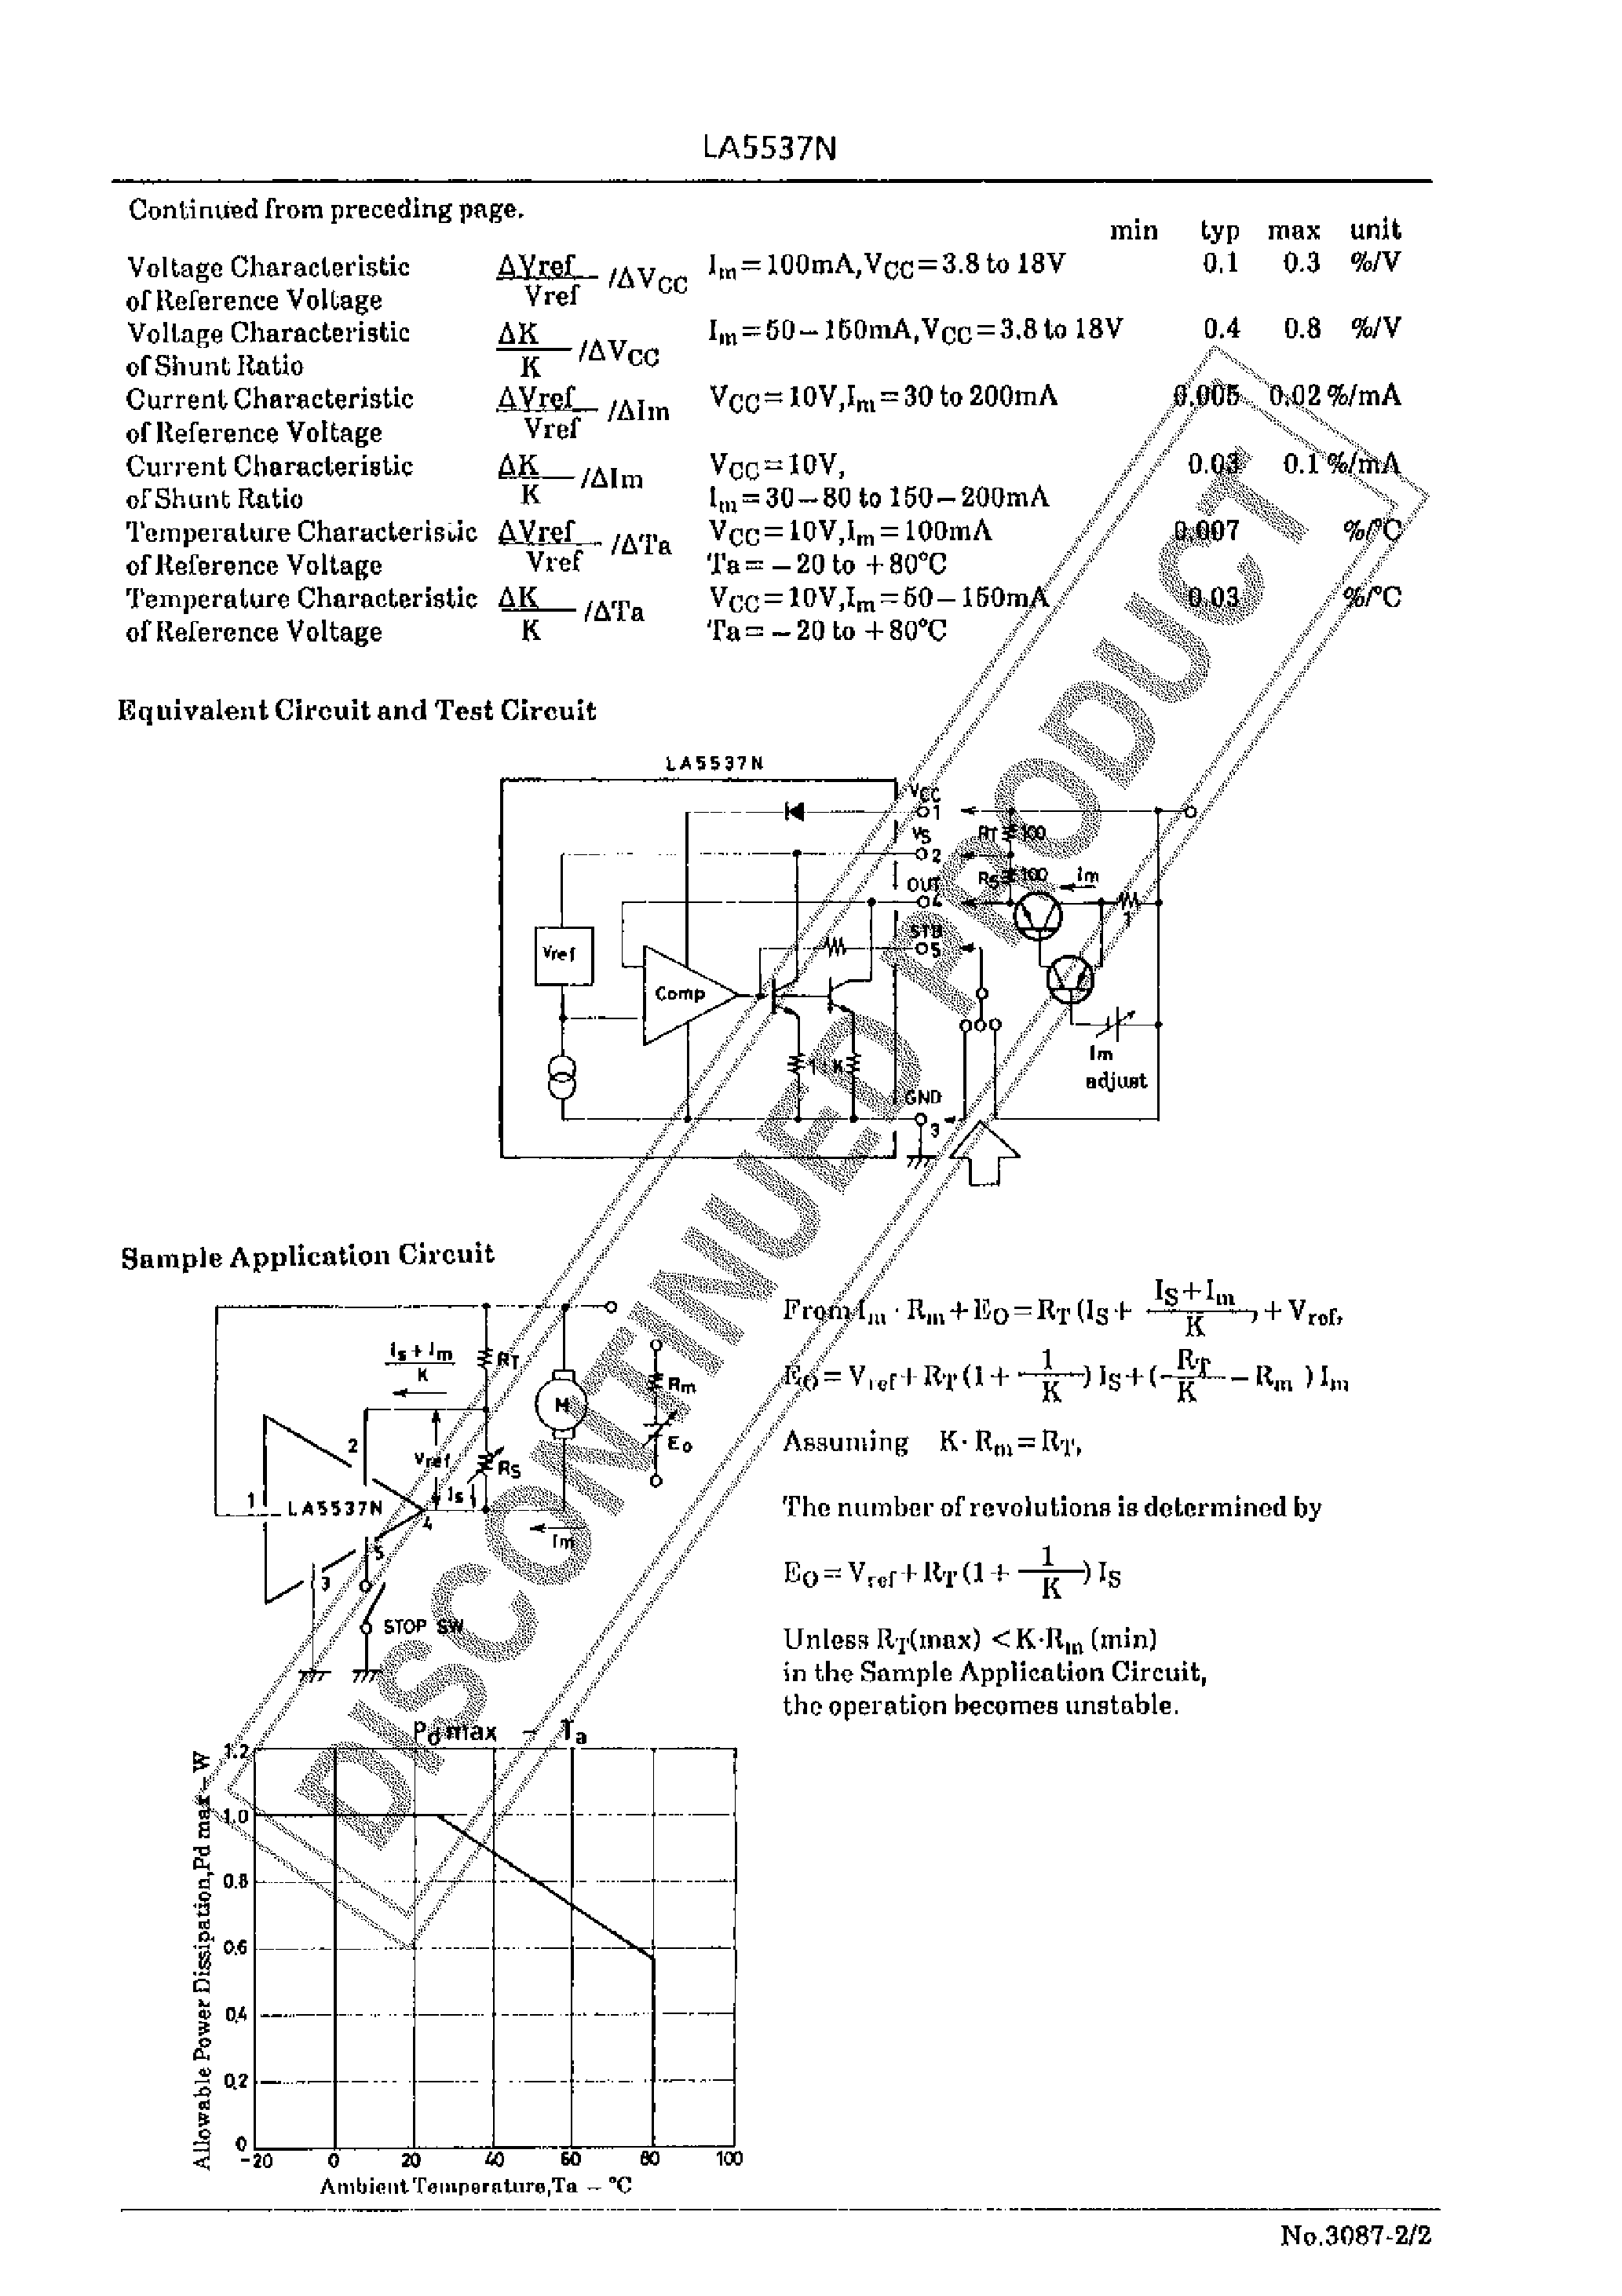 Datasheet LA5537N - CONSUMER USE COMPACT DC MOTOR SPEED CONTROLLER page 2